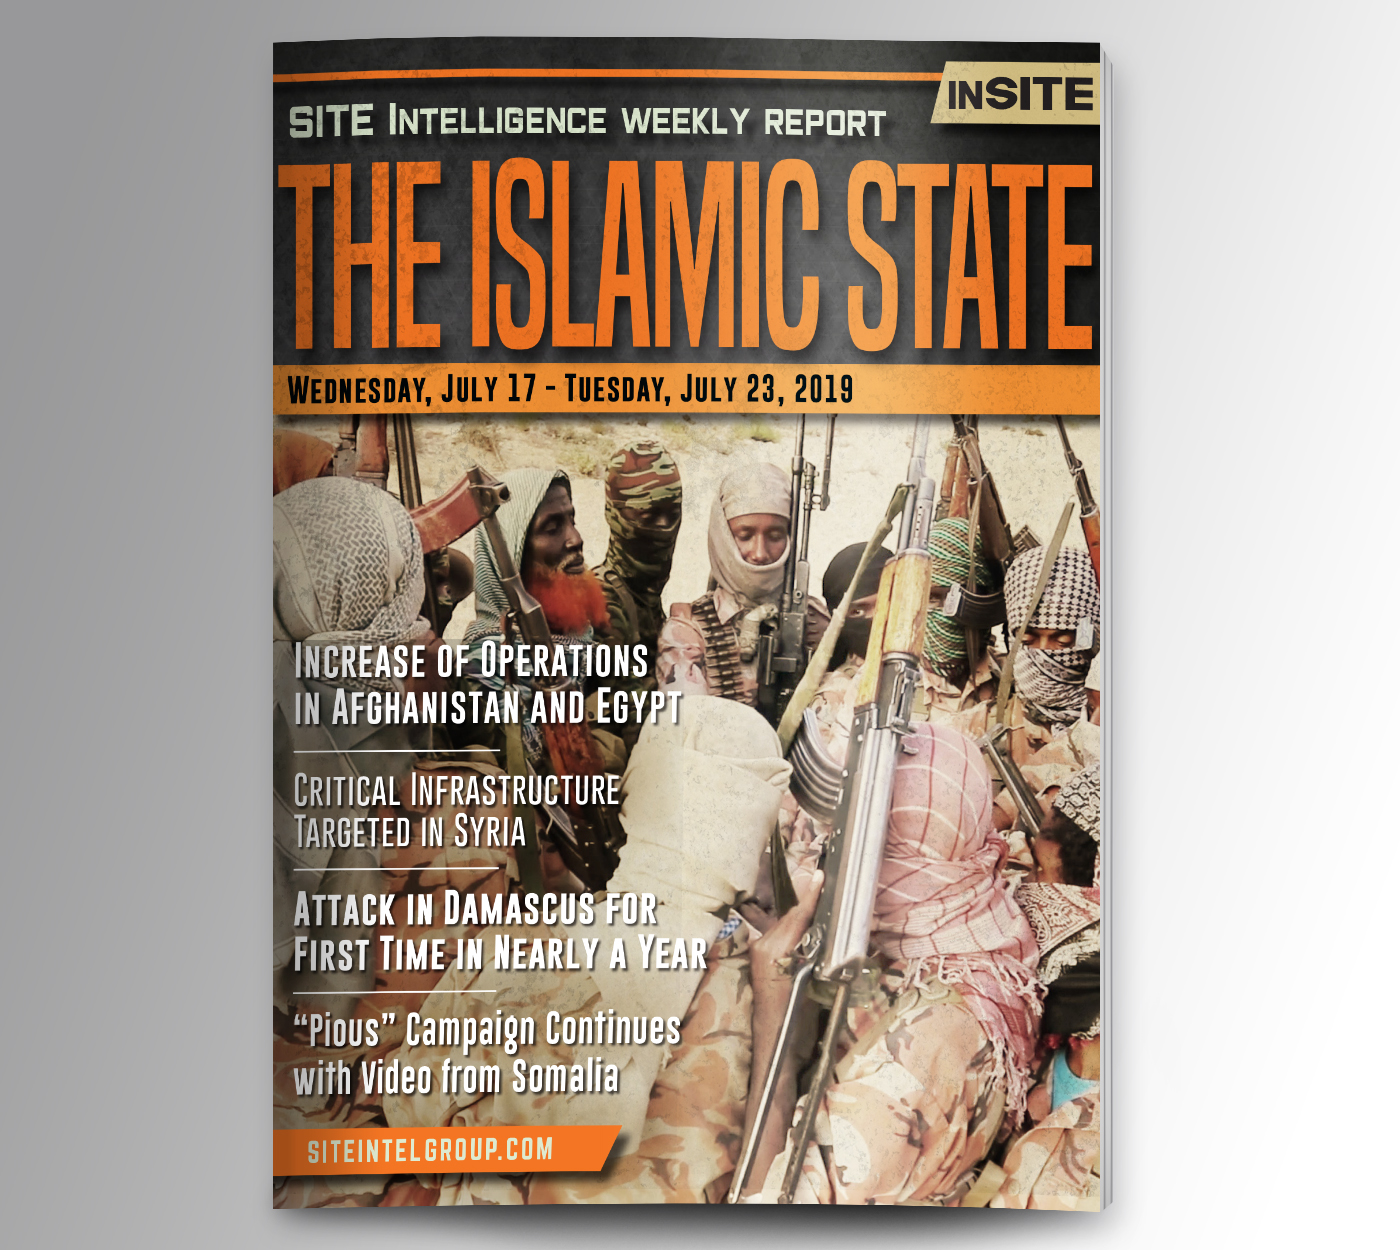 Weekly inSITE on the Islamic State for July 17-23, 2019